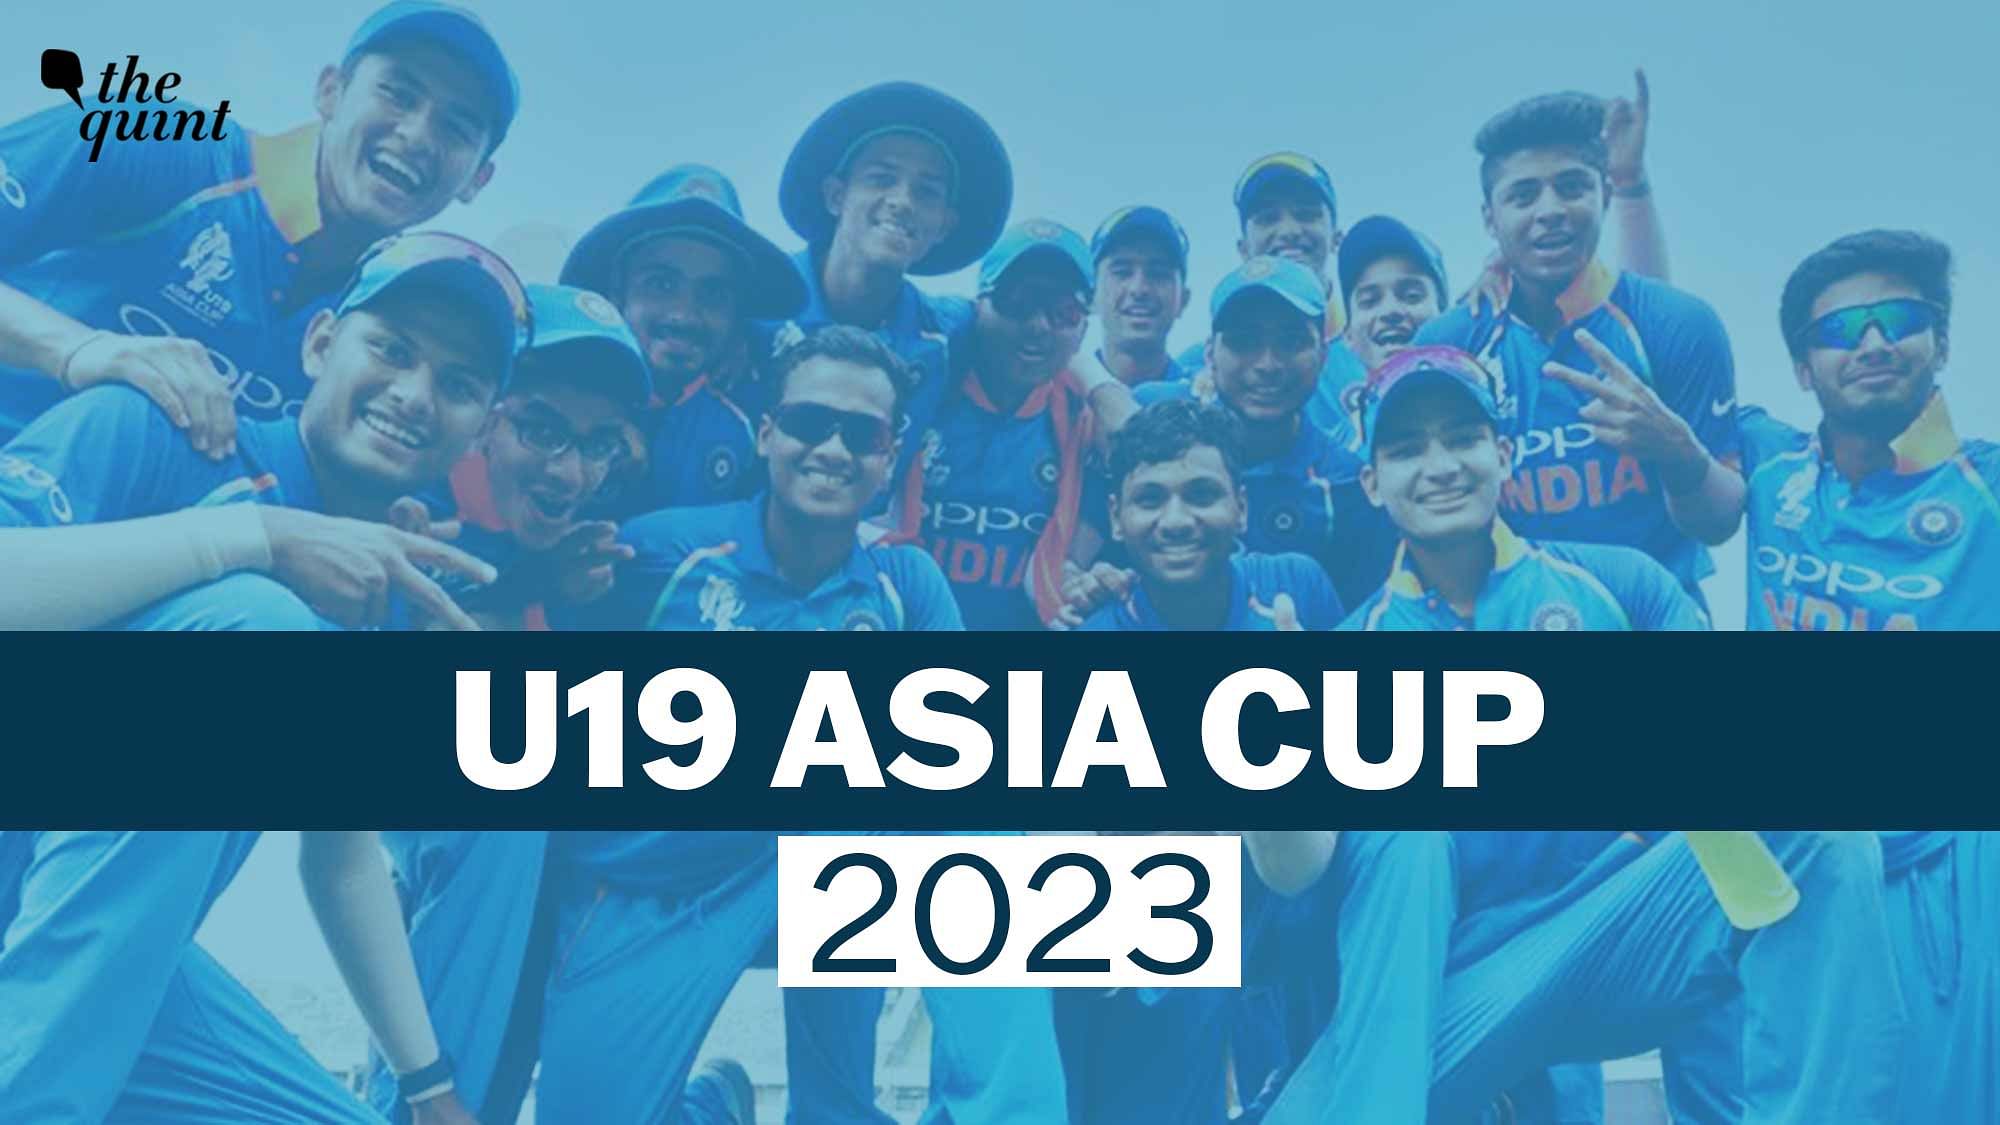 ACC U19 Asia Cup 2023 Schedule Matches, Groups, Venue, Timings, Live Streaming, Telecast, and